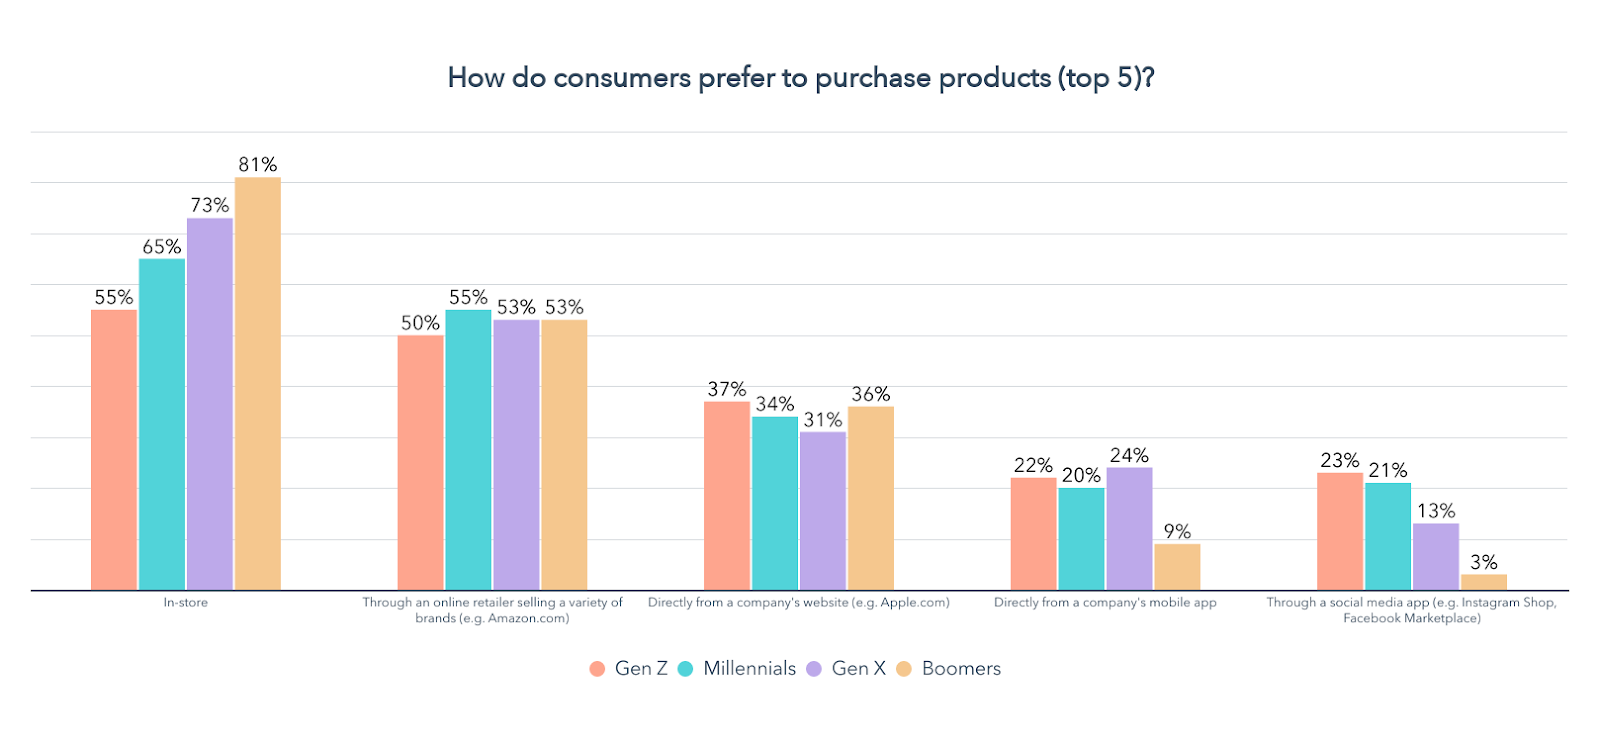 how do consumers in each generation prefer to buy products